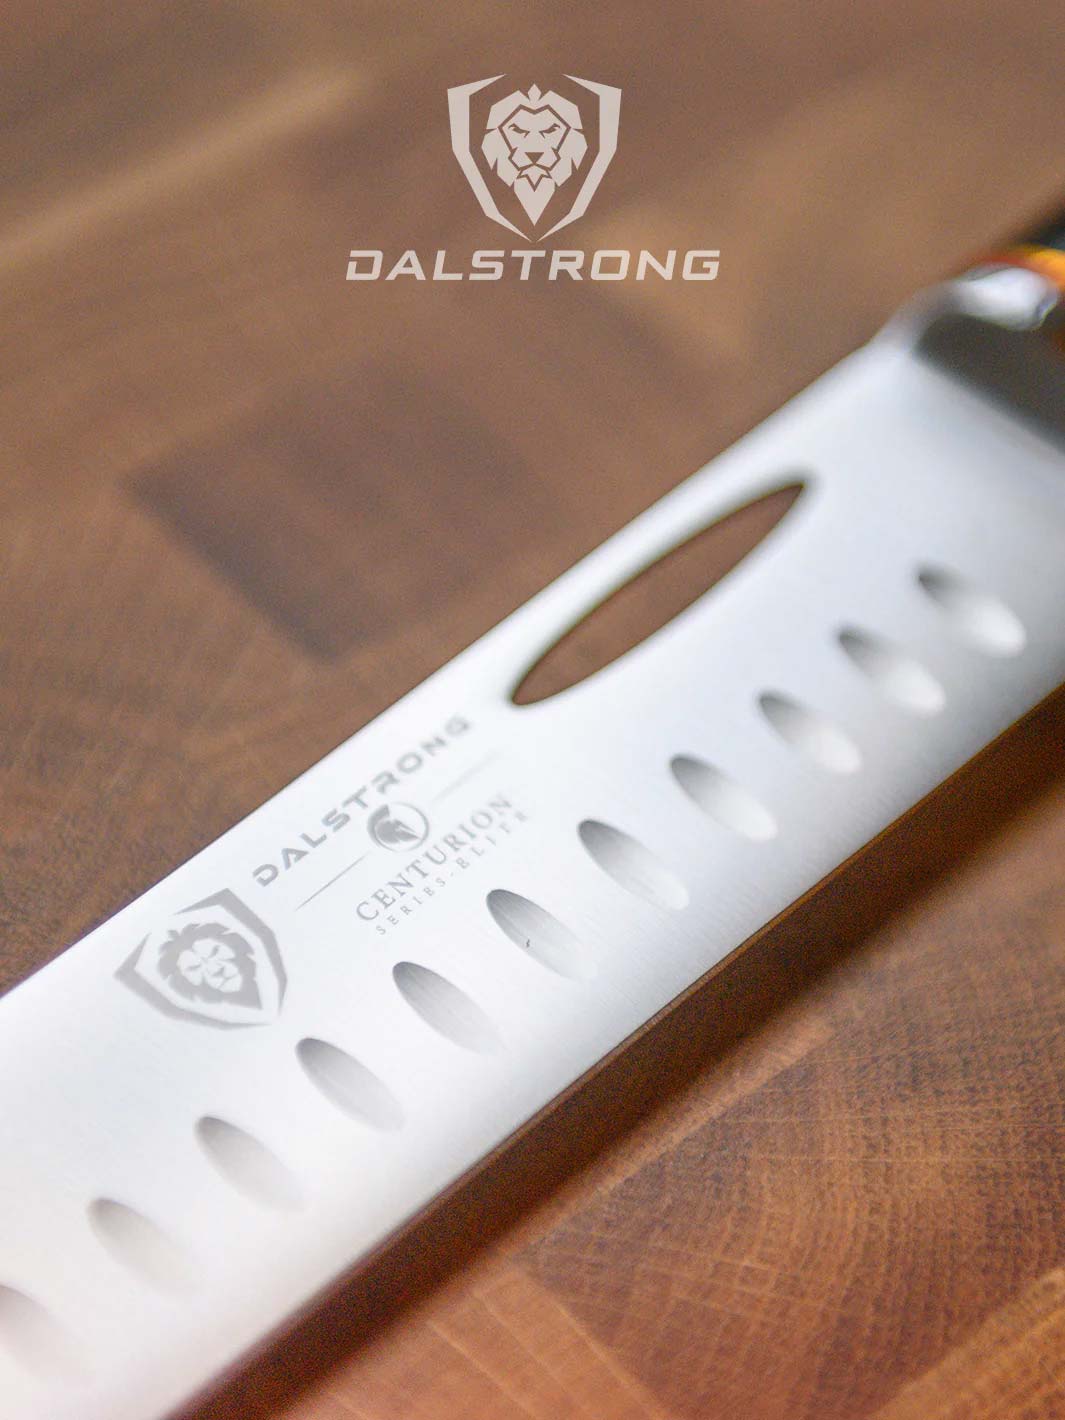 Dalstrong centurion series 12 inch slicing and carving knife with black handle featuring it's blade.